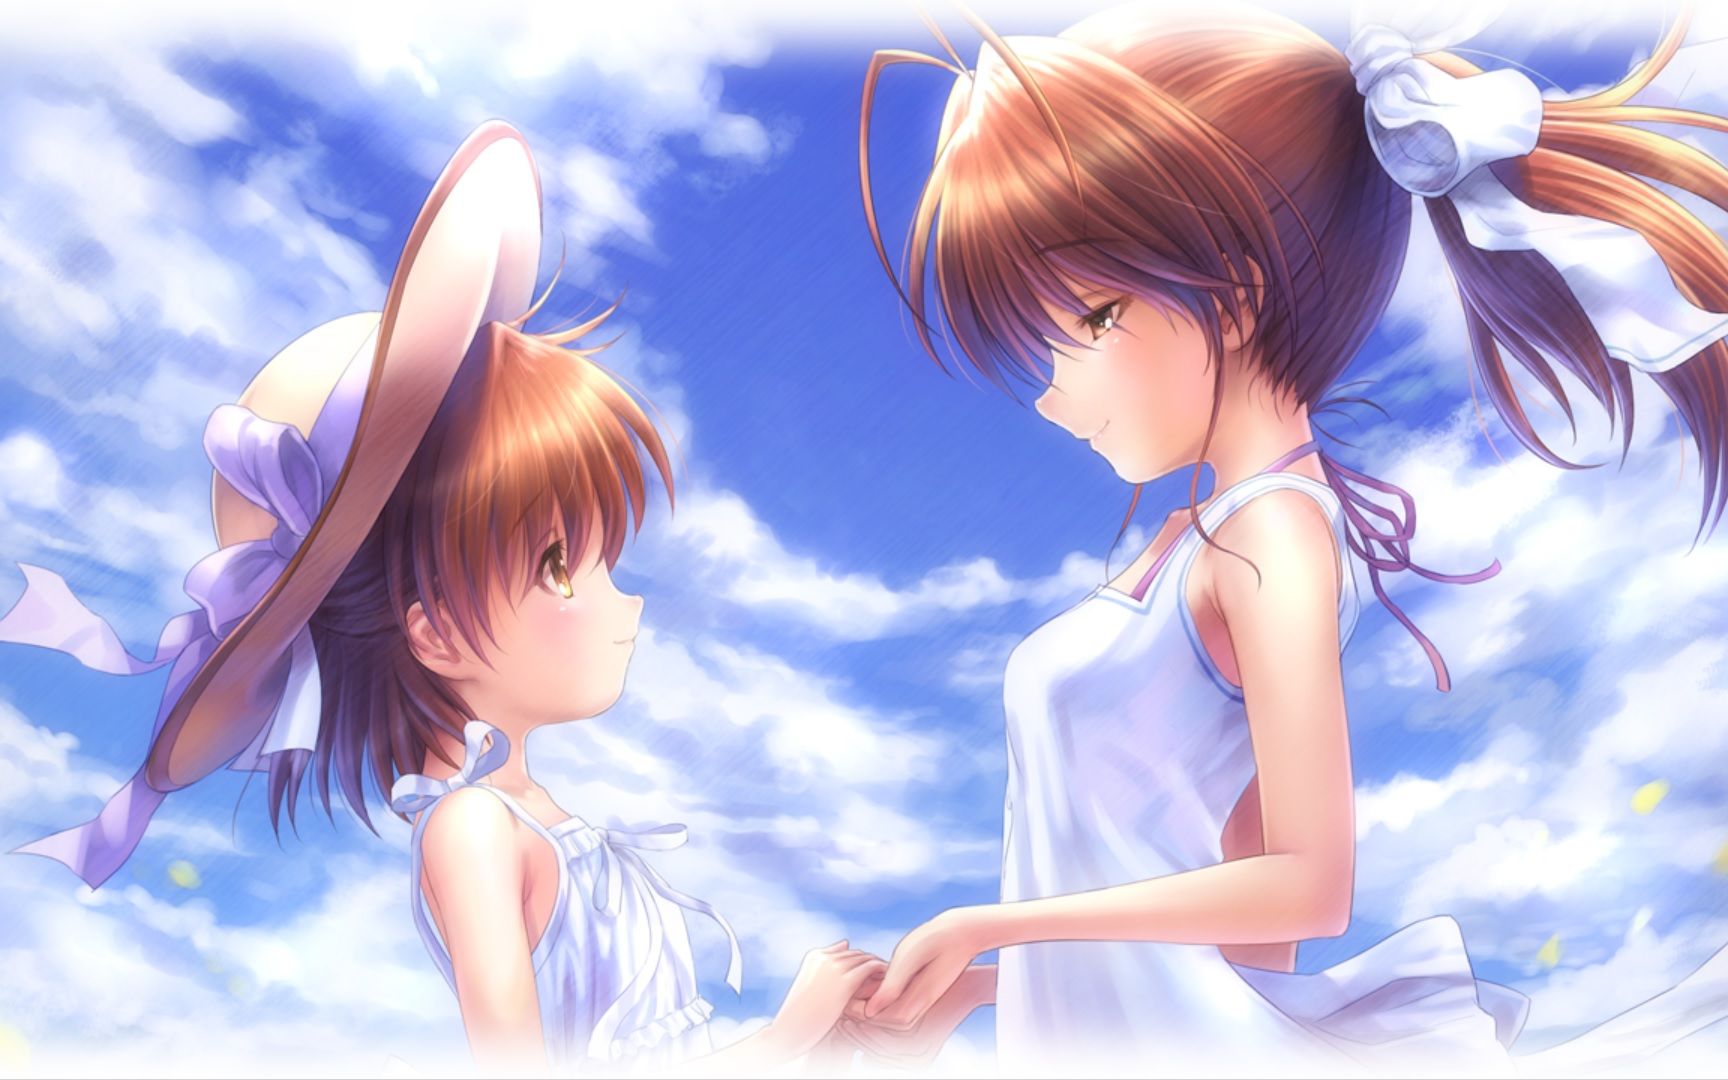 clannad afterstory图片